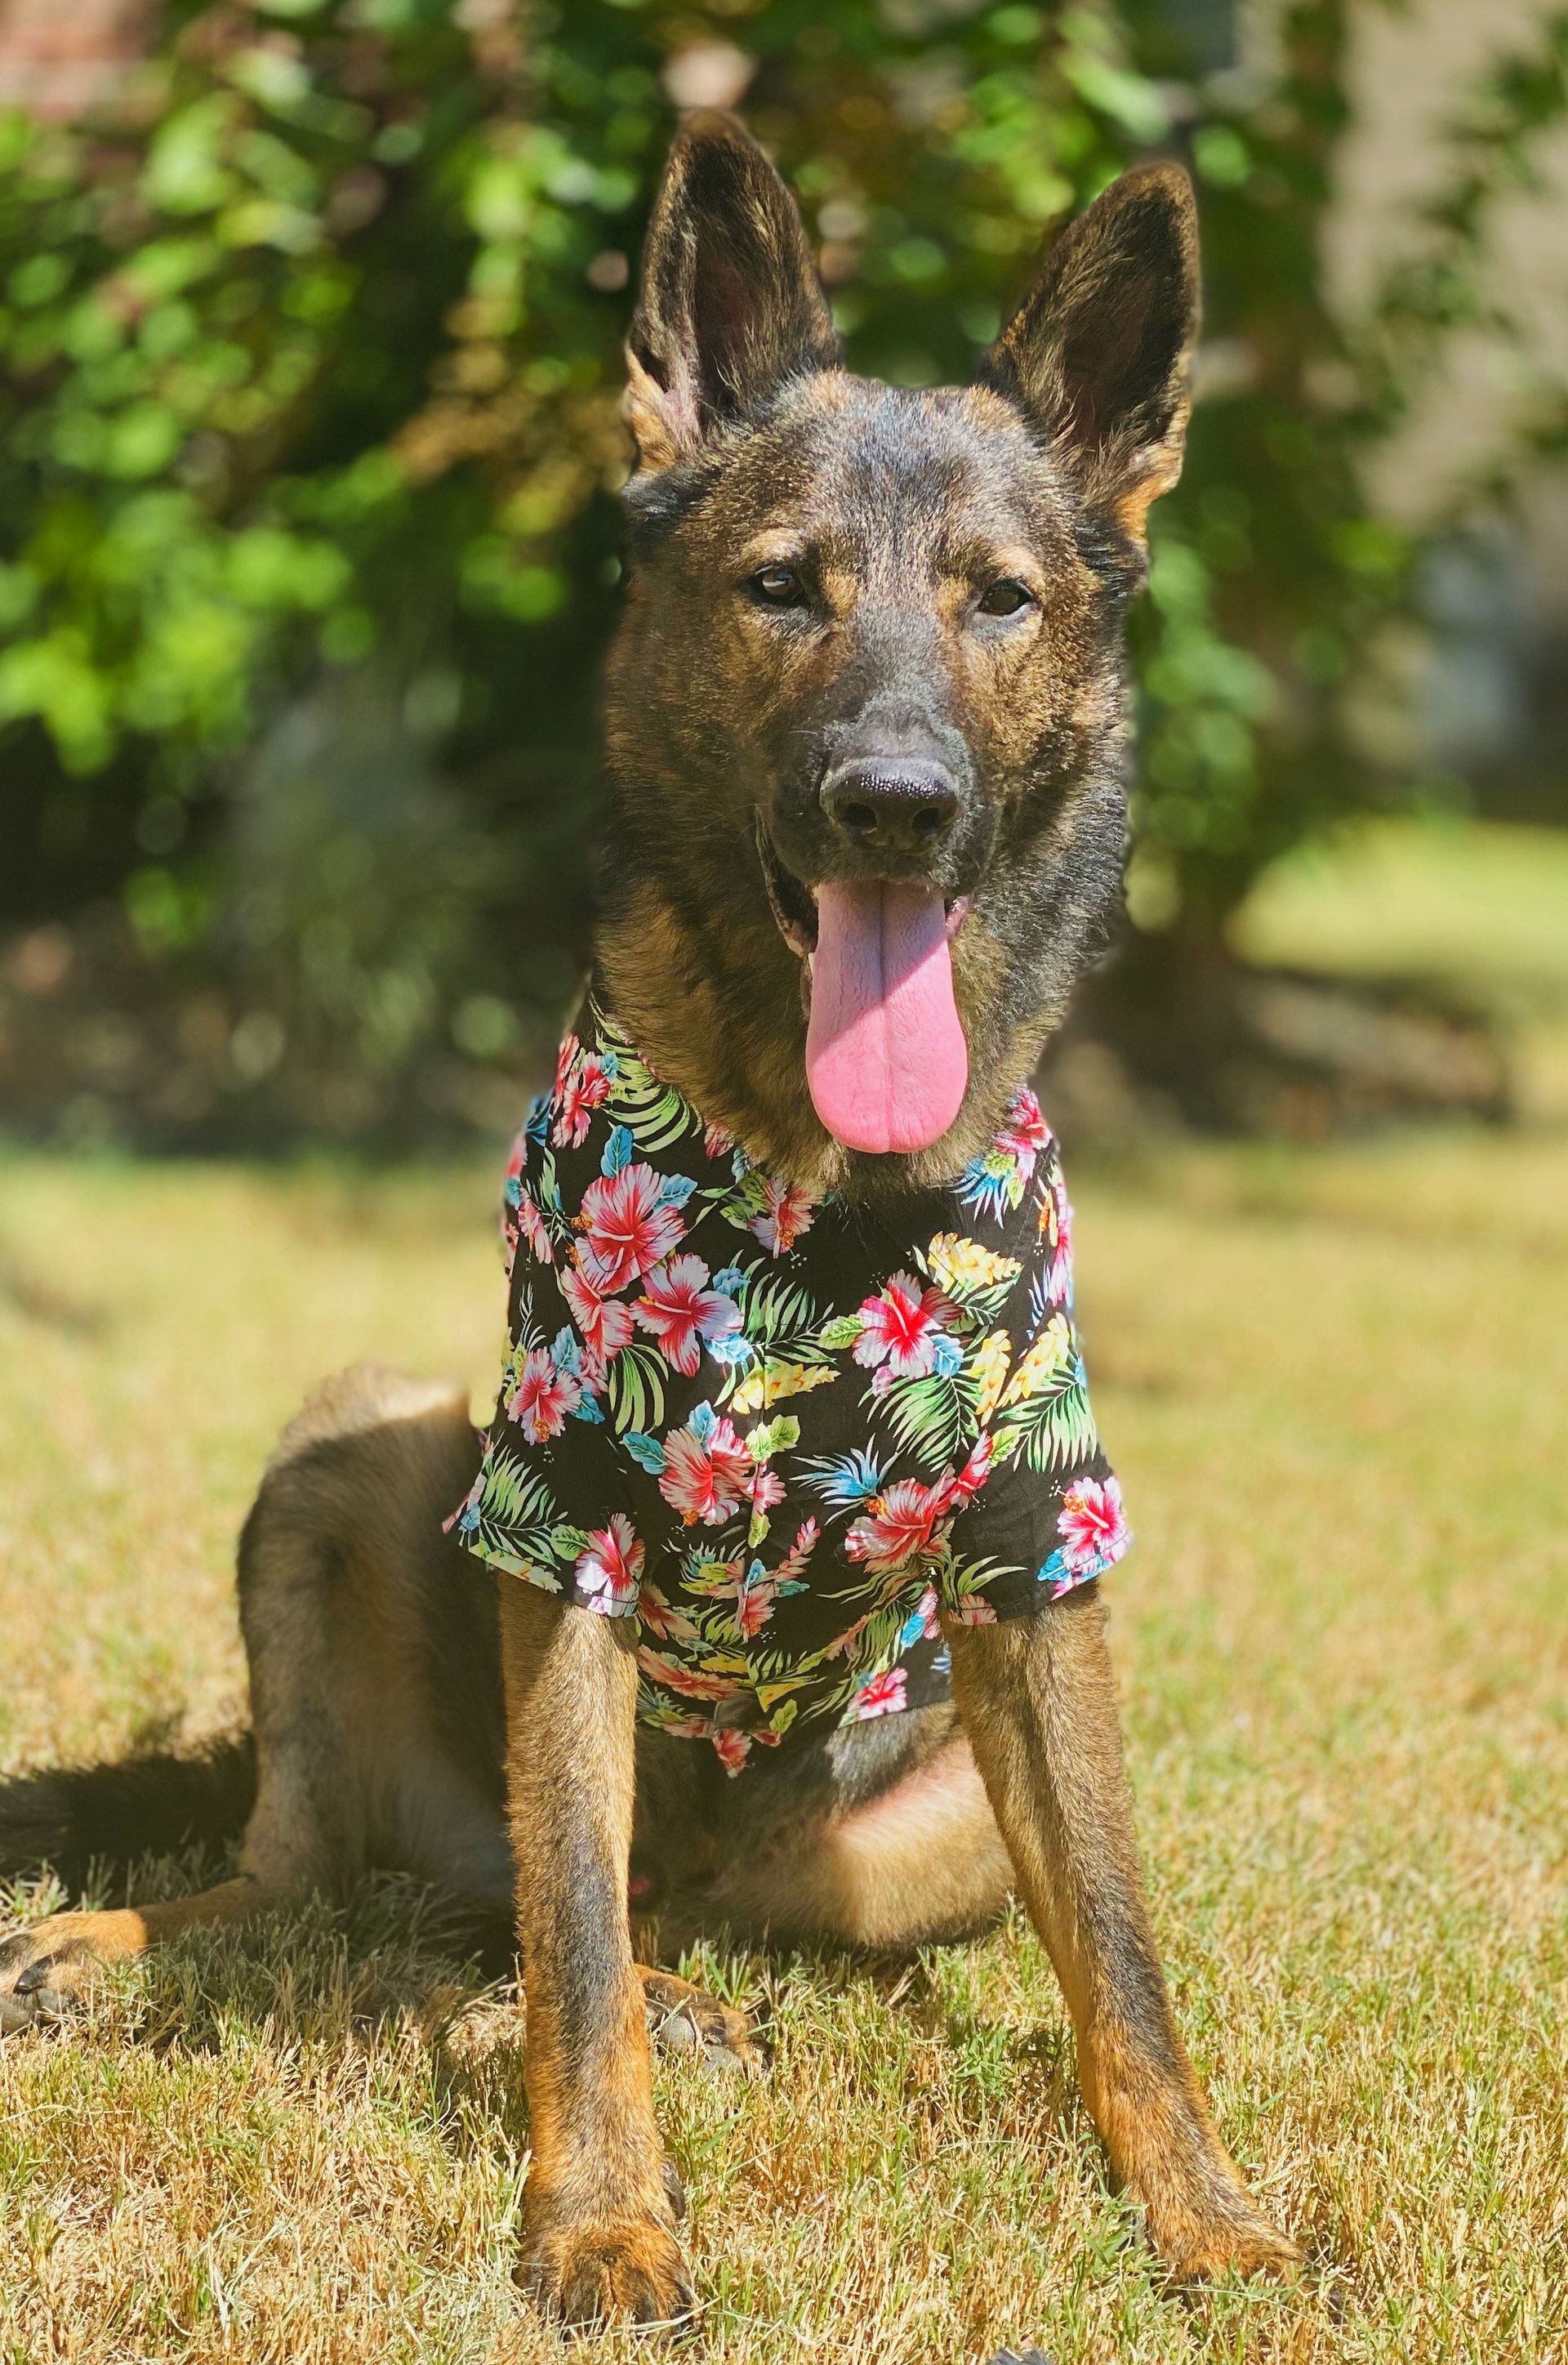 A german shepherd wearing a floral shirt is sitting in the grass.